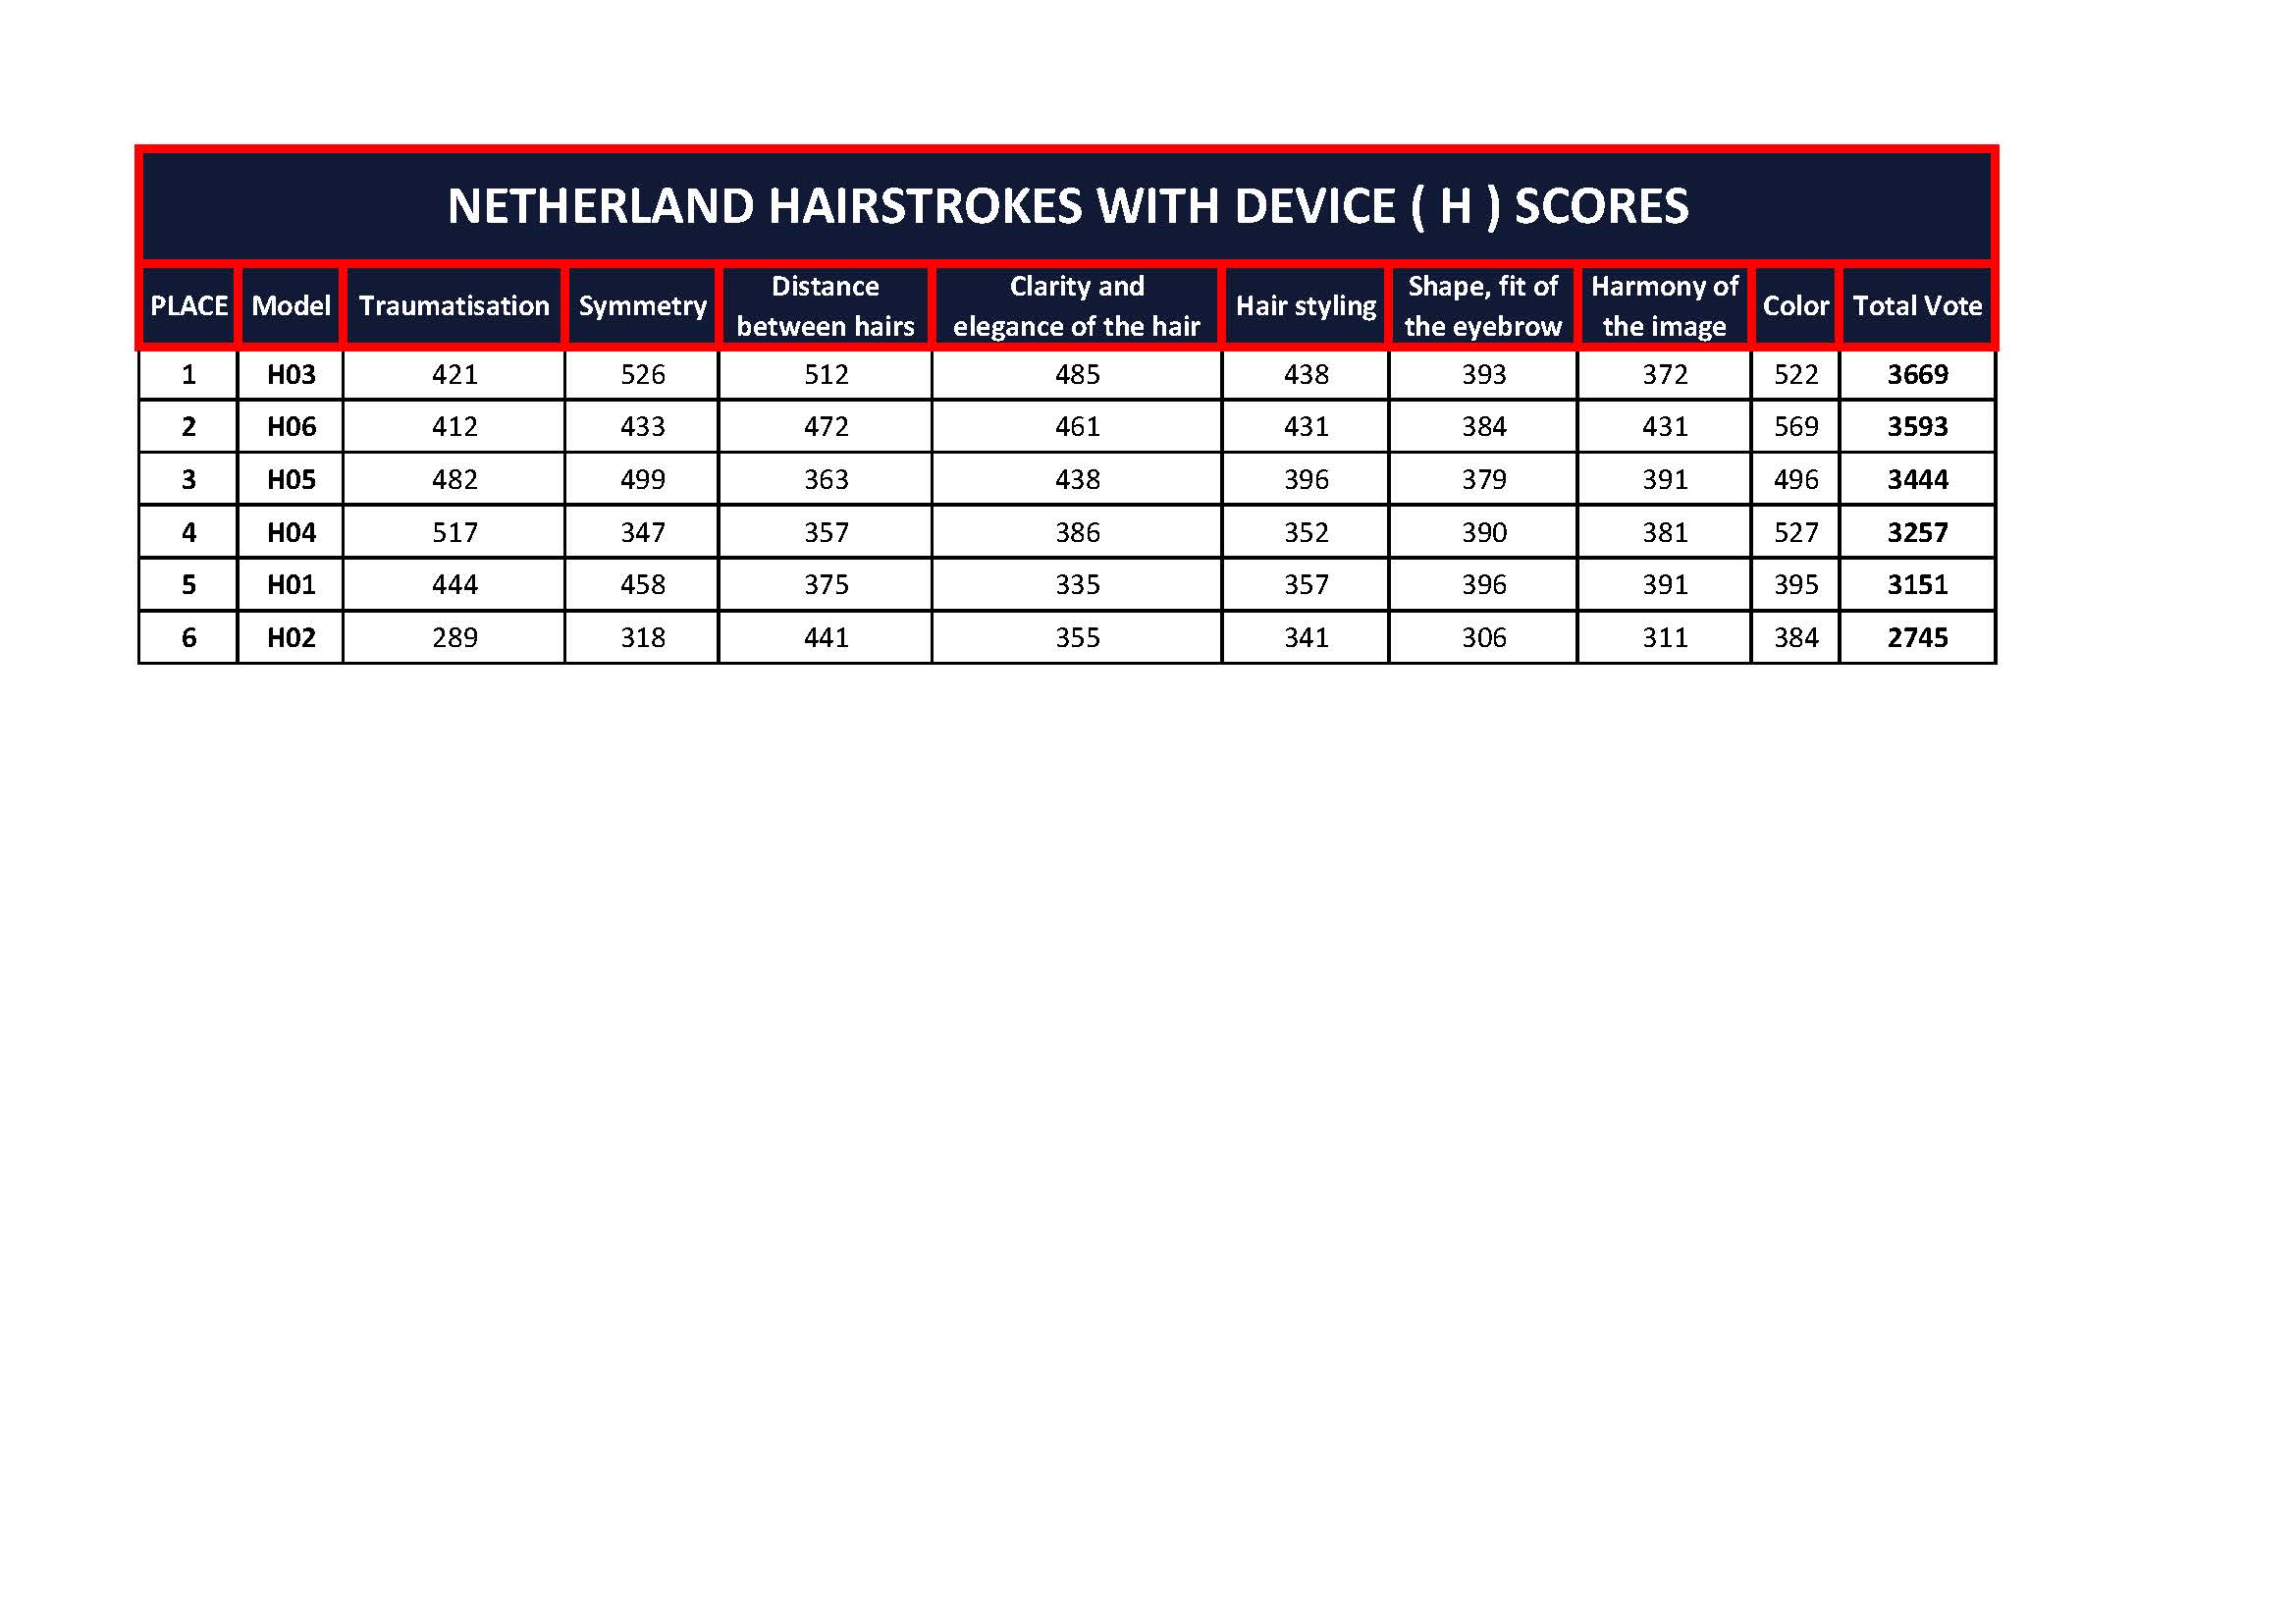 NETHERLAND HAIRSTROKES WITH DEVICE ( H ) SCORES